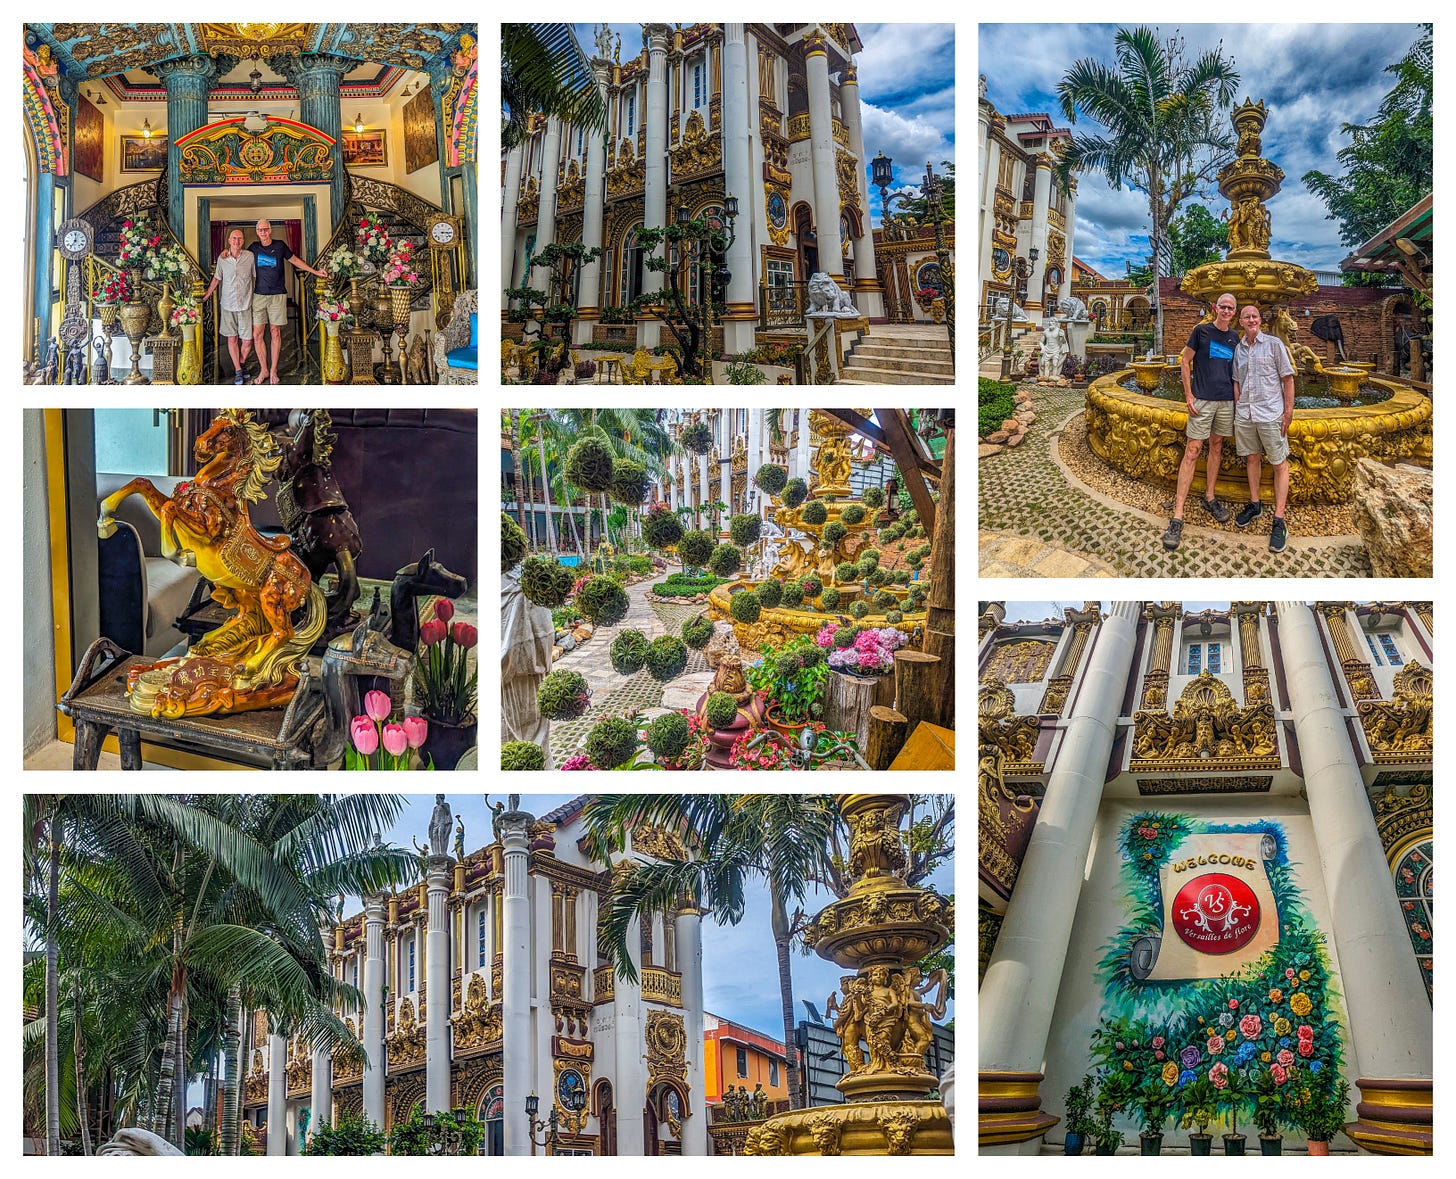 Collage of exterior and interior of Versailles de Flore, including Brent and Michael in the ballroom, in front of a fountain, plus a statue of a golden horse, elaborate landscaping, and more. 